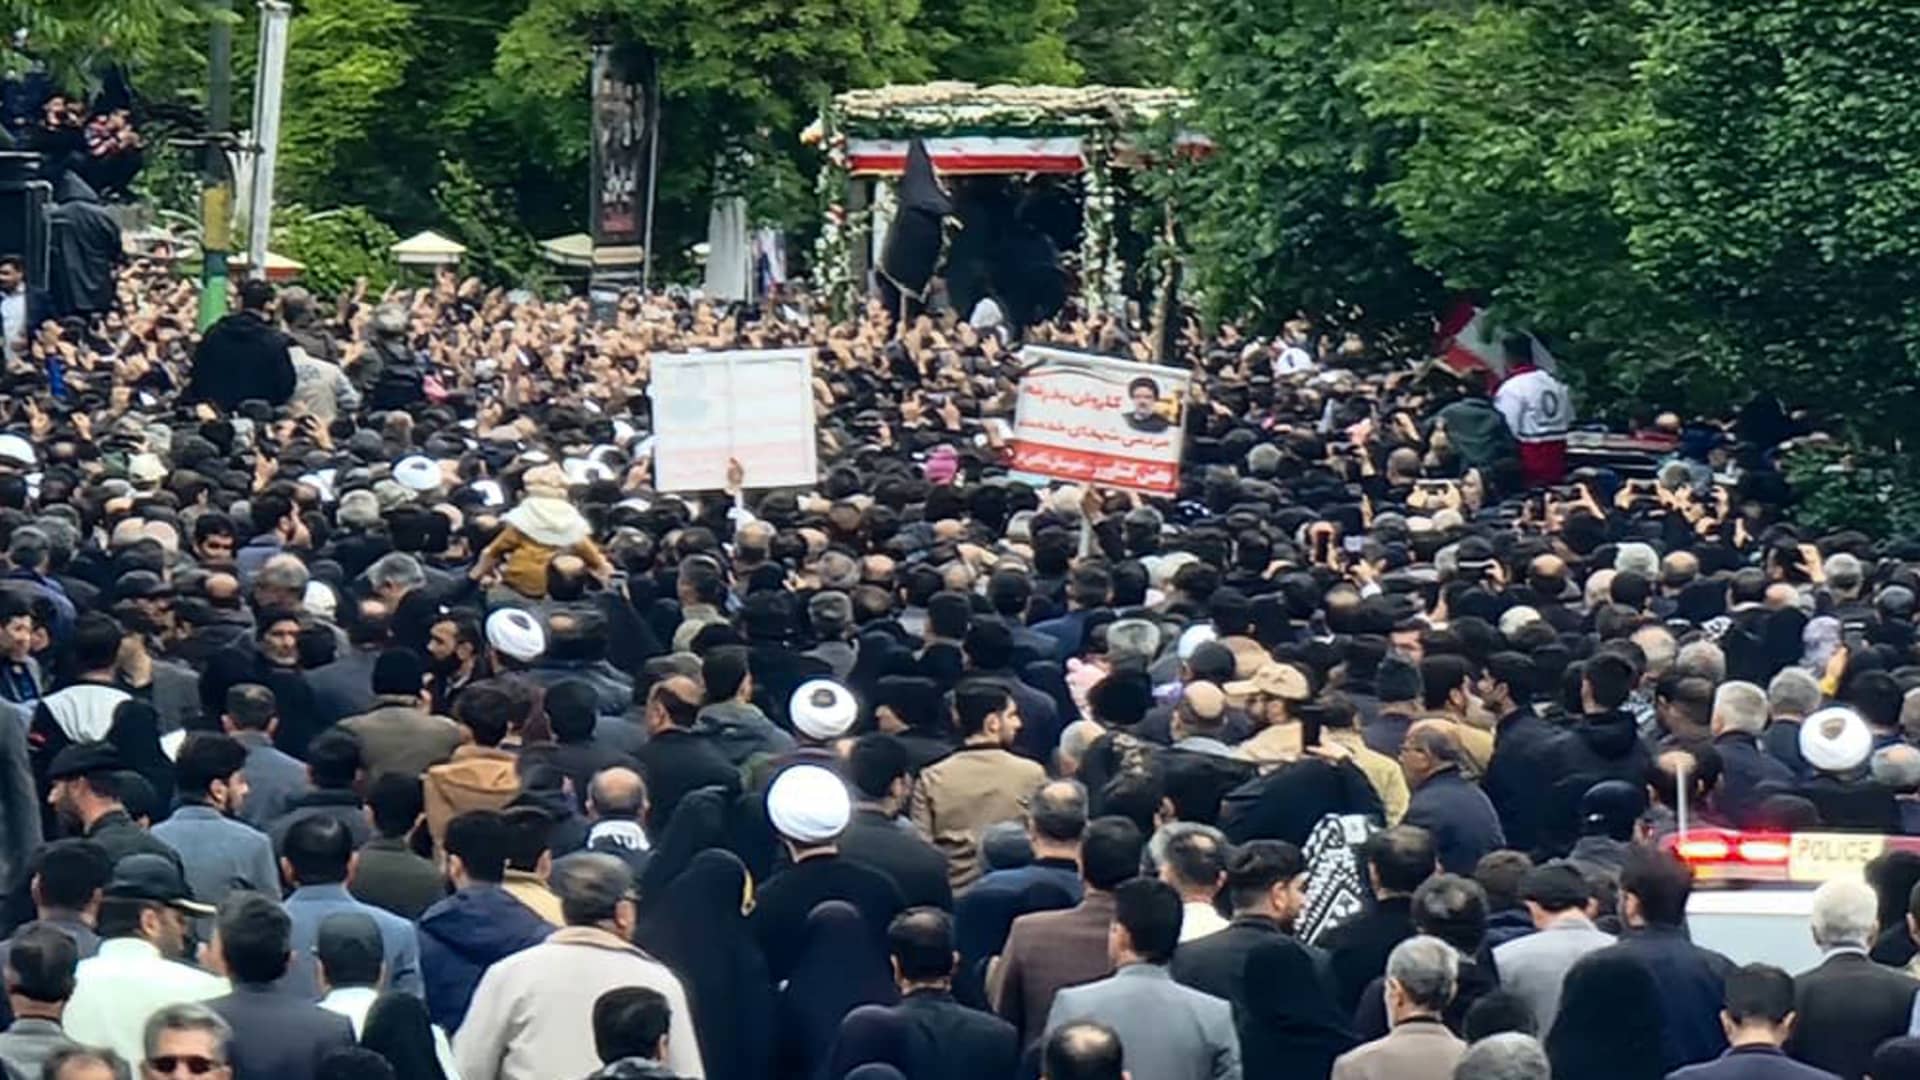 Iran begins days of nationwide funeral rites for President Ebrahim Raisi after helicopter crash